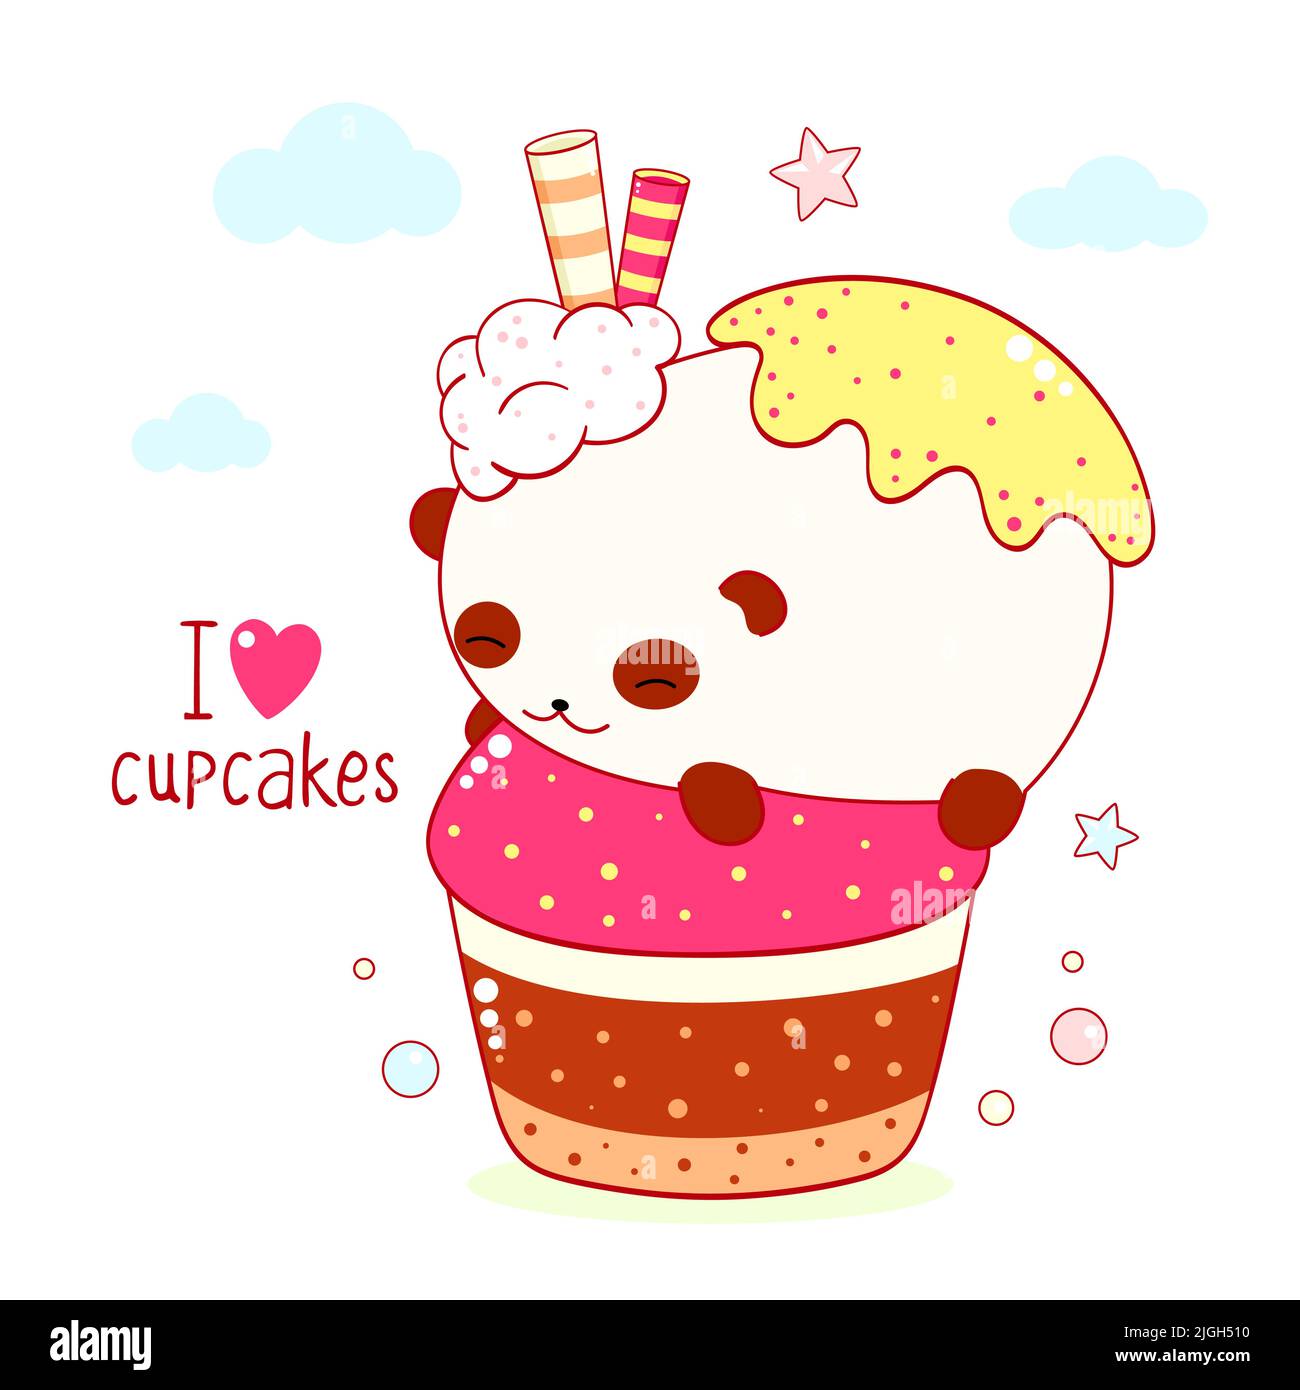 Cute square card in kawaii style. Funny fat panda with cupcake. Inscription I love cupcakes. Can be used for t-shirt print, stickers, greeting card de Stock Vector